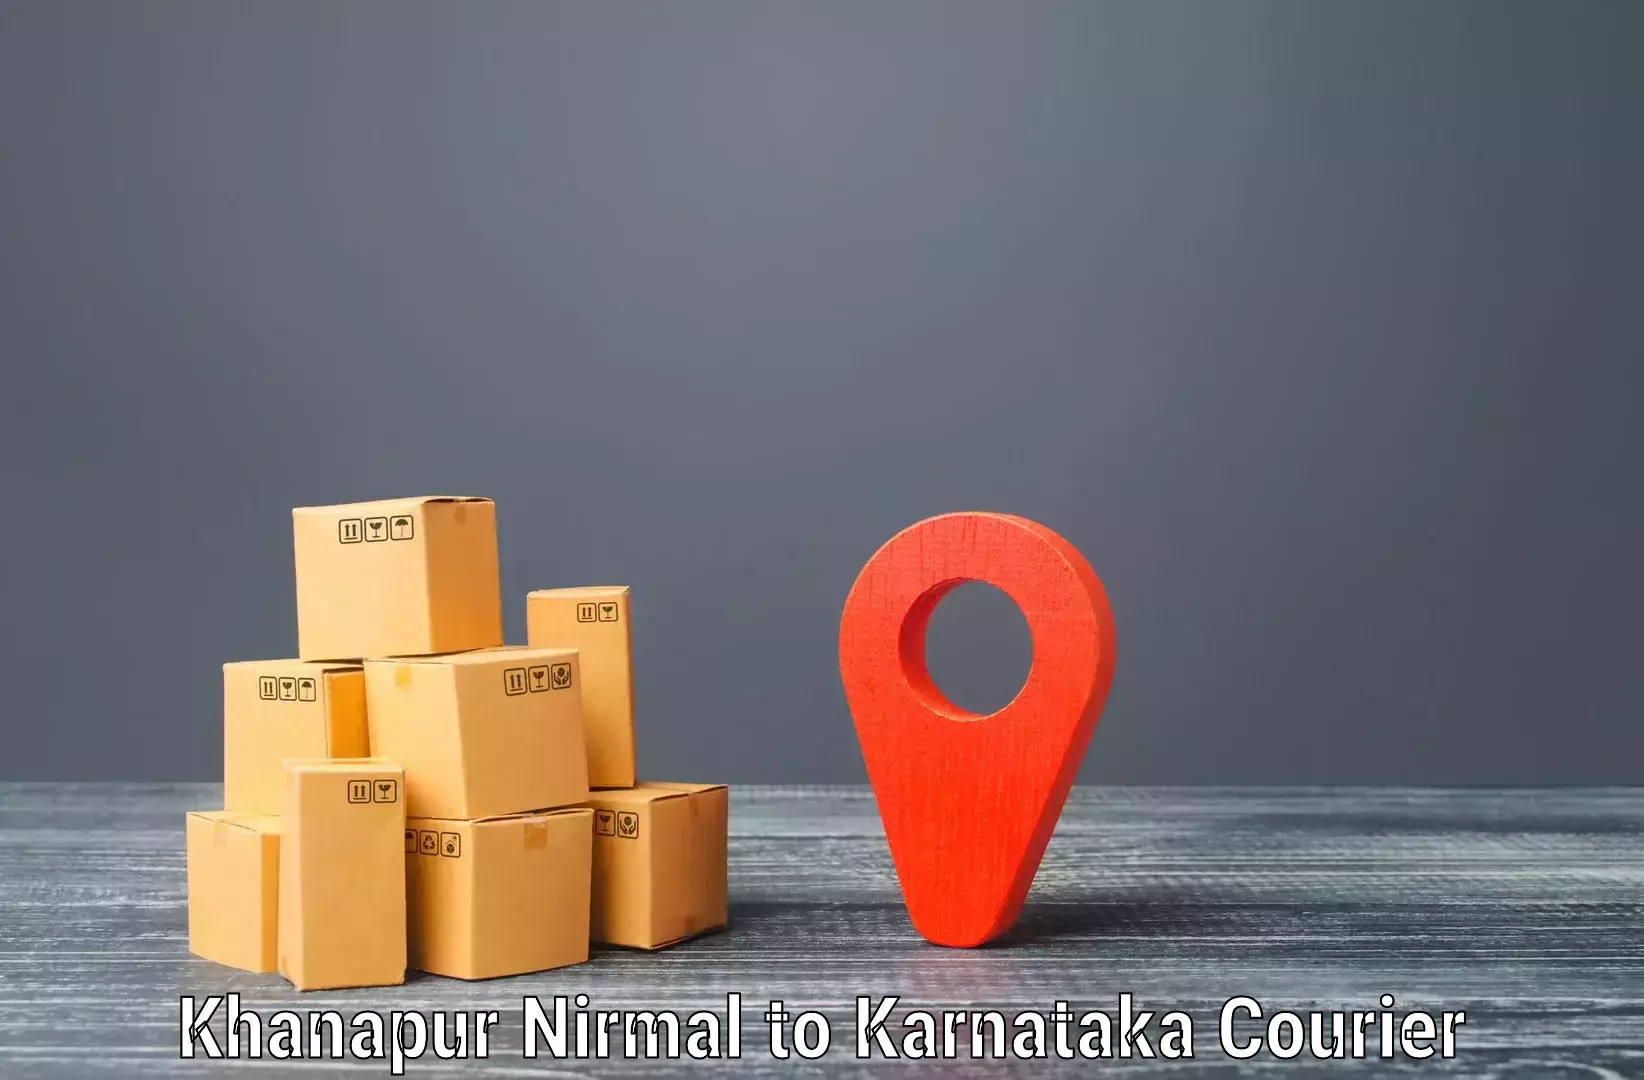 Express courier facilities in Khanapur Nirmal to Jagalur